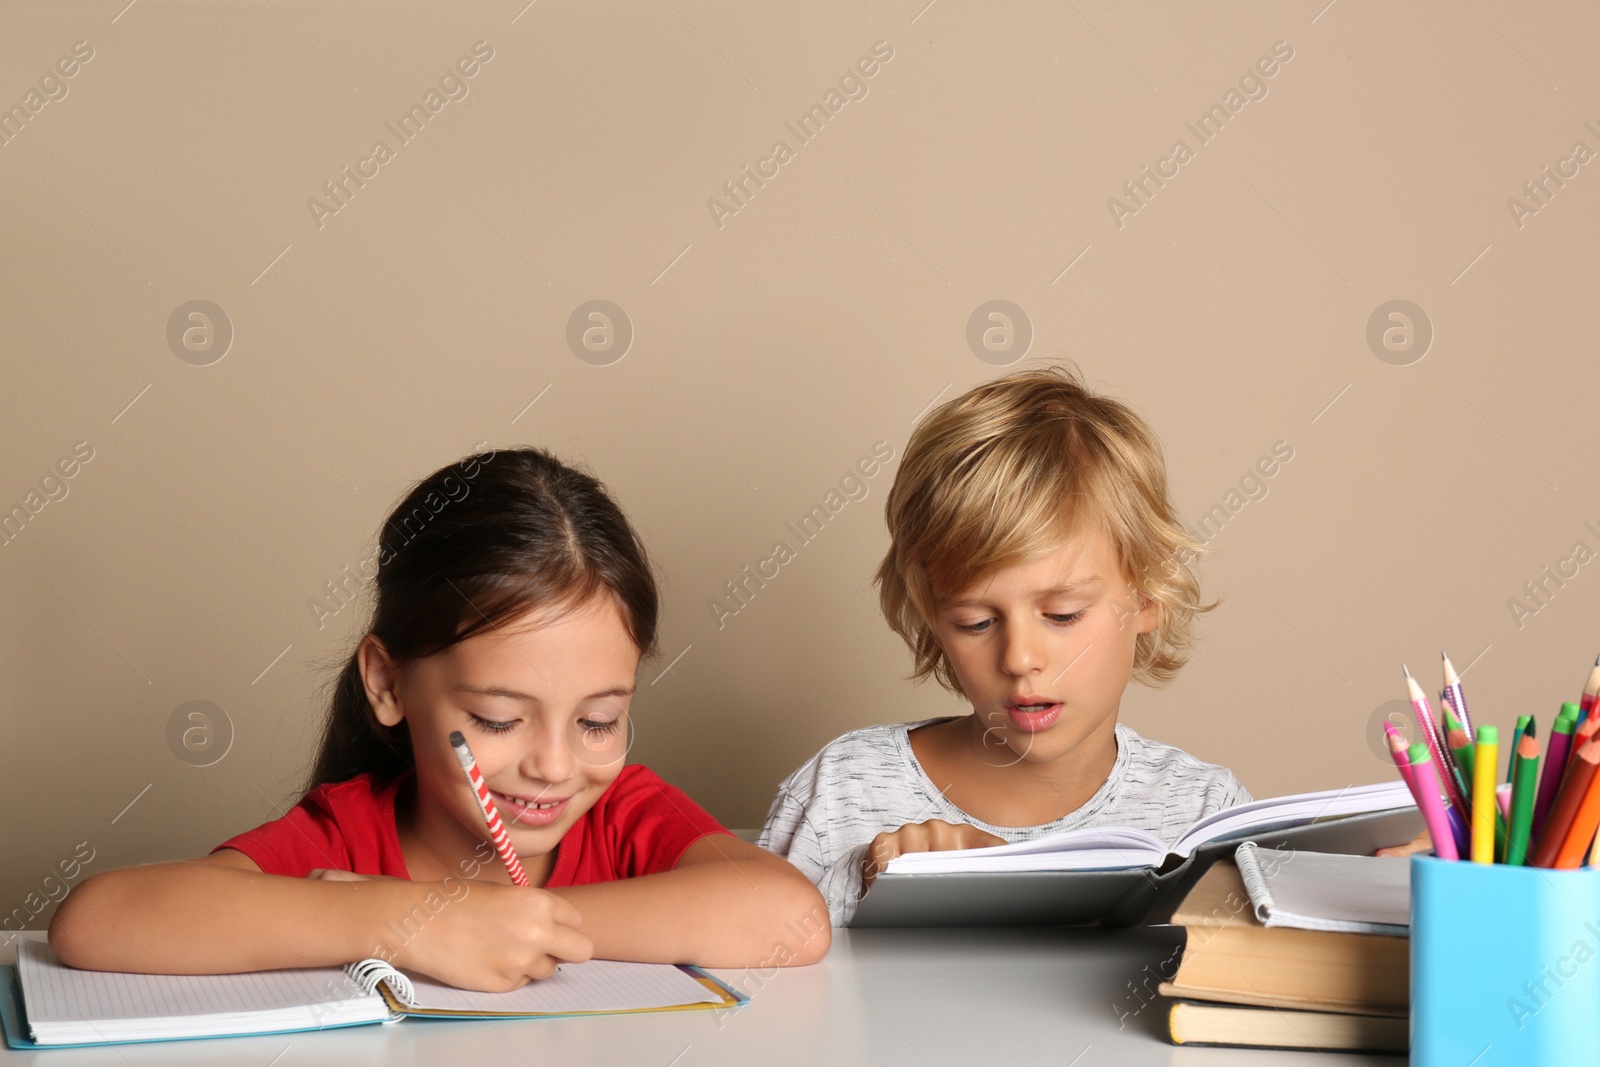 Photo of Little boy and girl doing homework at table on beige background